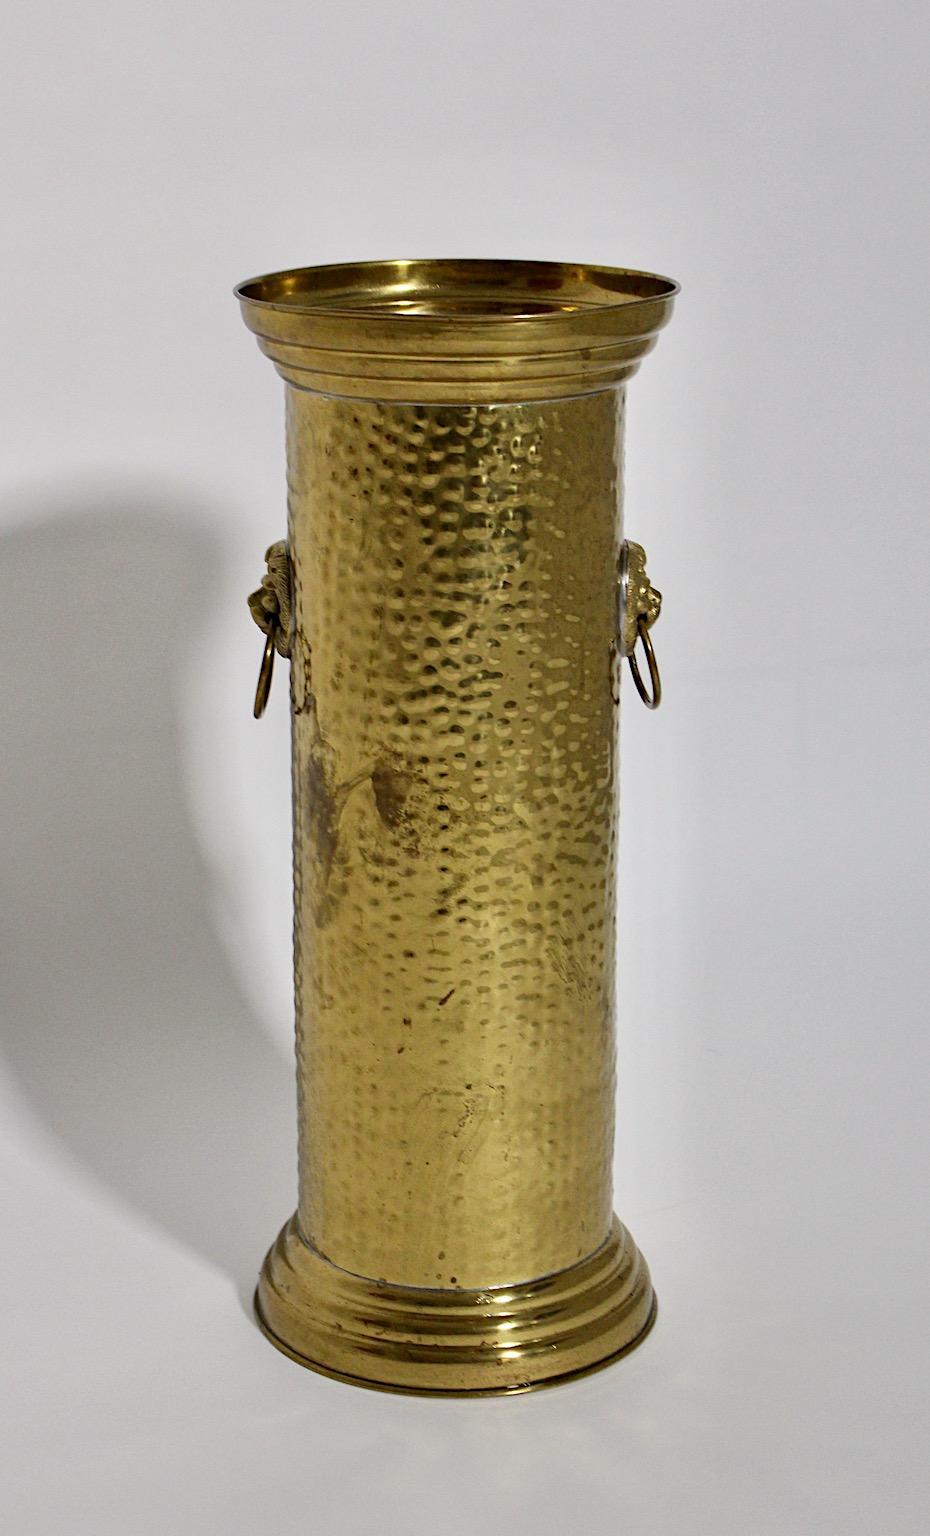 Hollywood Regency Style vintage circular like umbrella stand or cane holder from hammered brass 1970s Italy.
The stunning umbrella stand is decorated with lions heads on each side of the stand.
A beautiful piece which would guard your umbrellas or